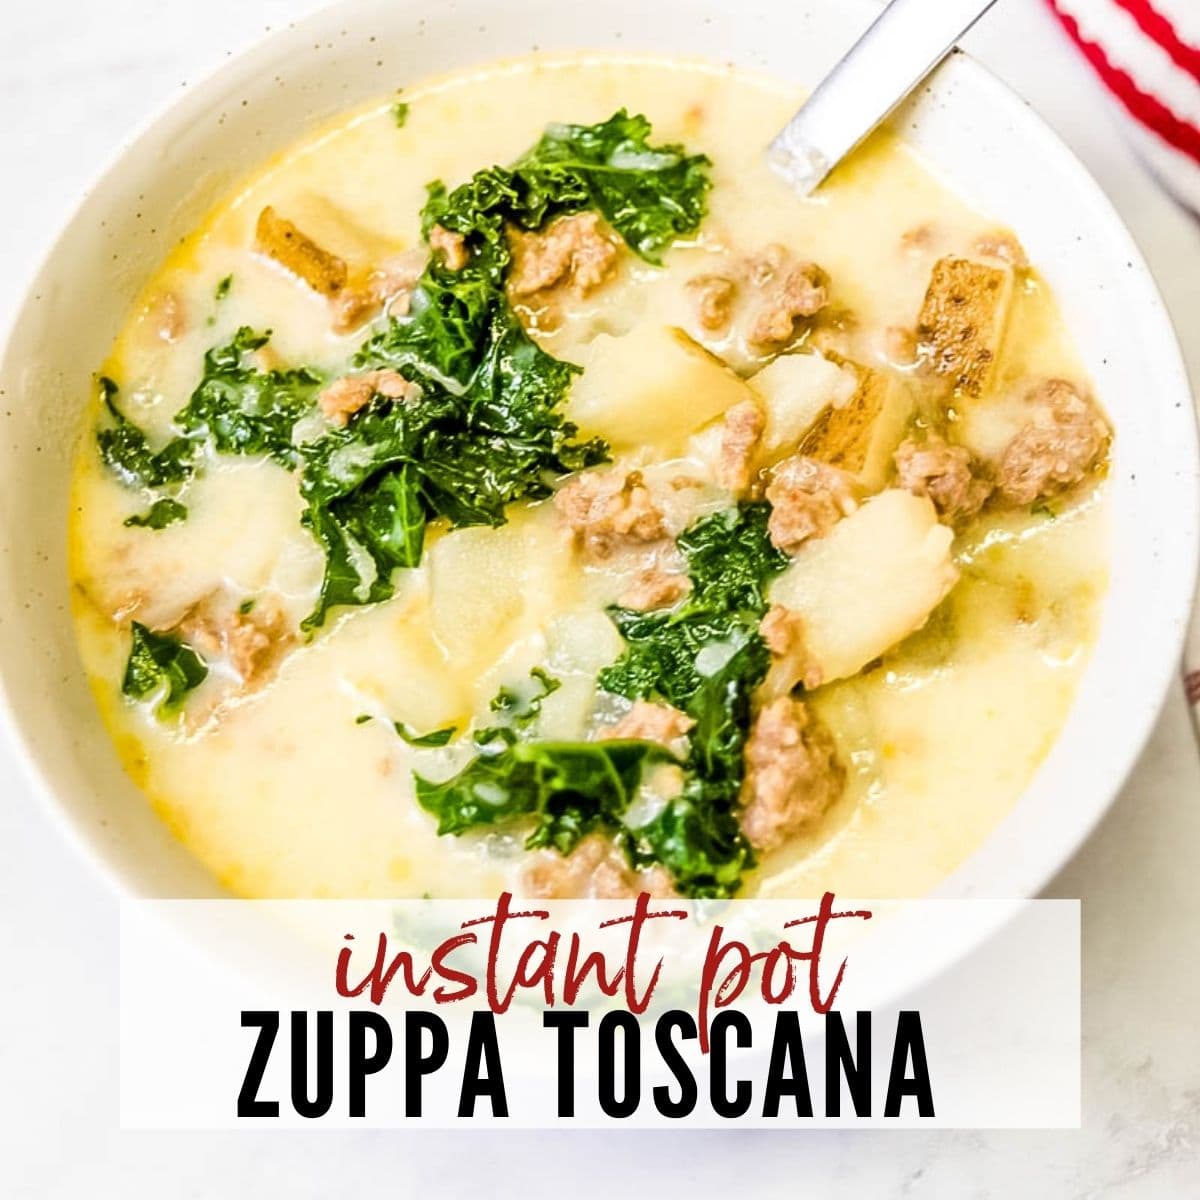 a bowl of Zuppa Toscana soup made with the instant pot with text overlay 